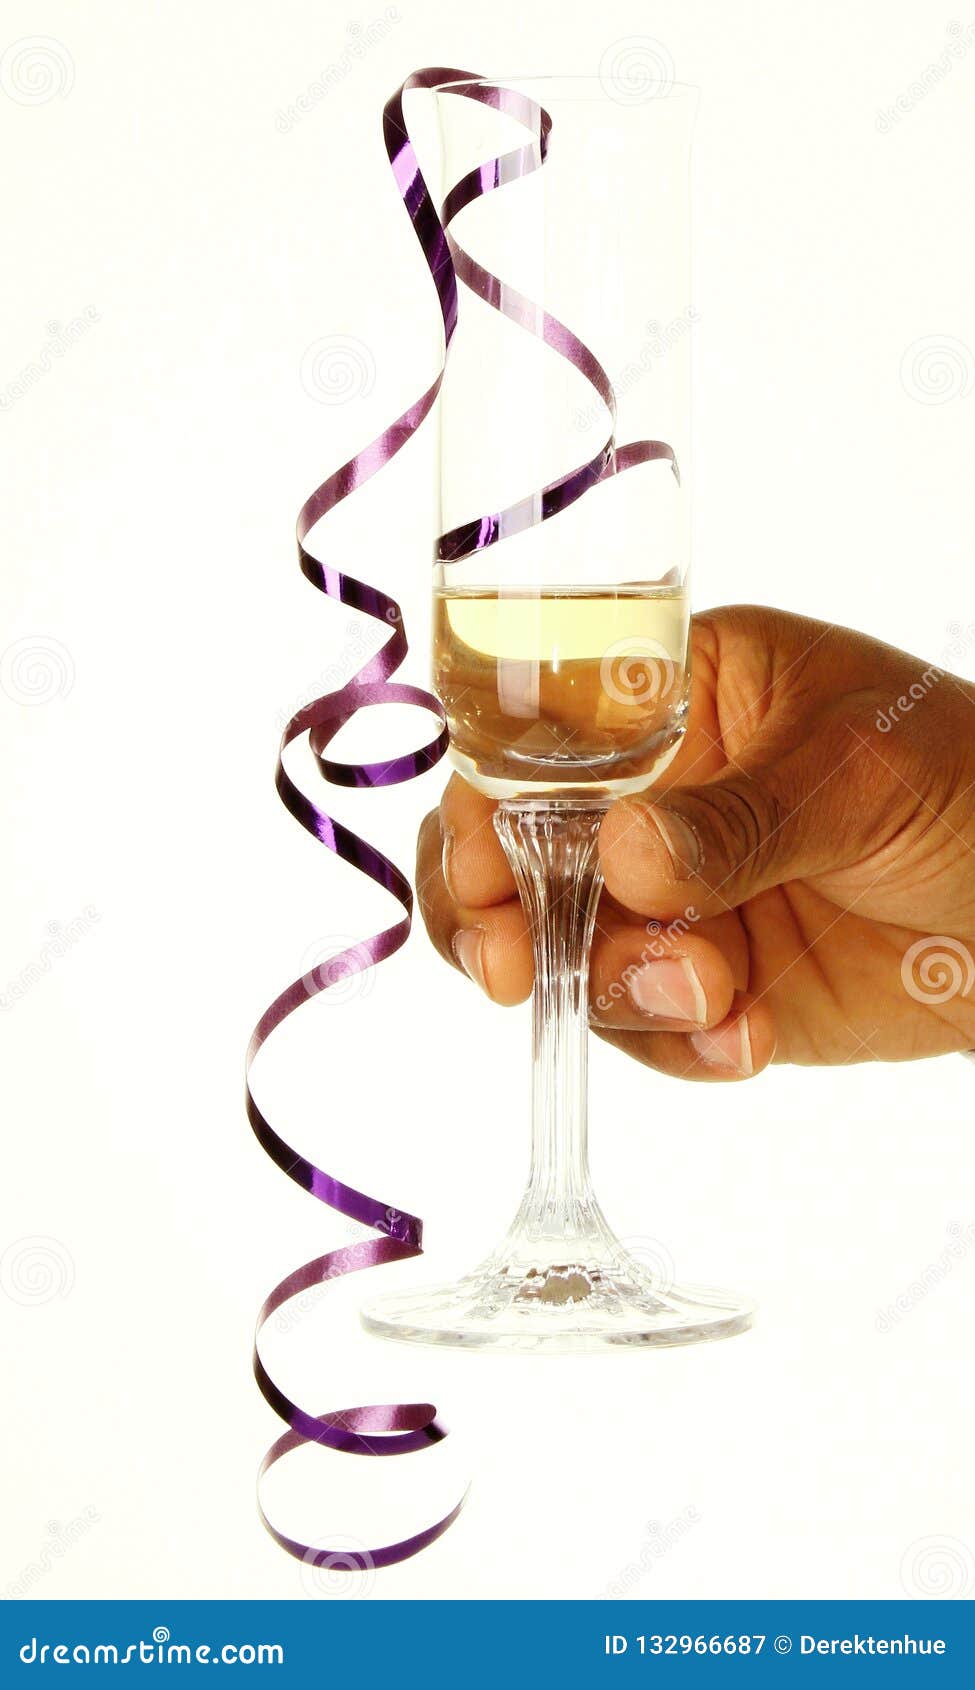 New Years Eve Celebration with Glass of Champagne Stock Image - Image ...